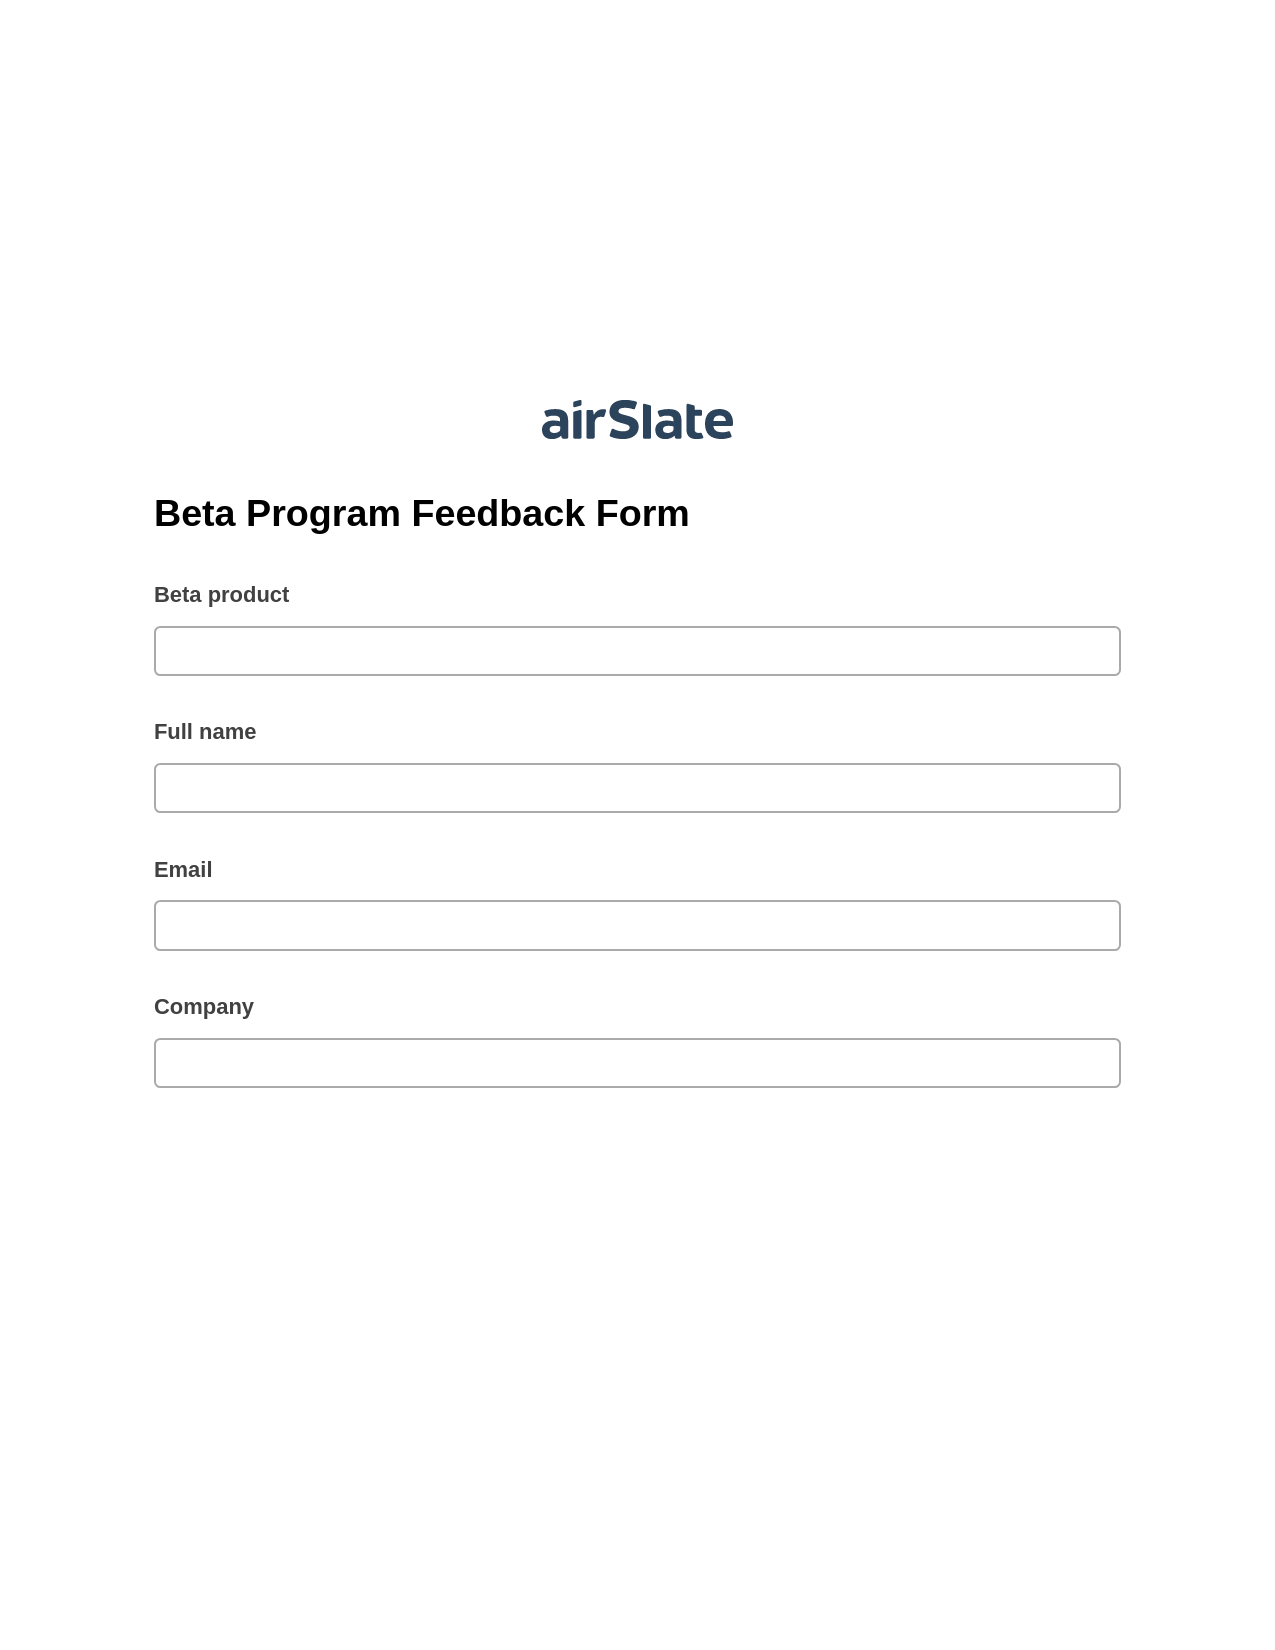 Beta Program Feedback Form Pre-fill from CSV File Bot, Create Salesforce Record Bot, Export to Formstack Documents Bot